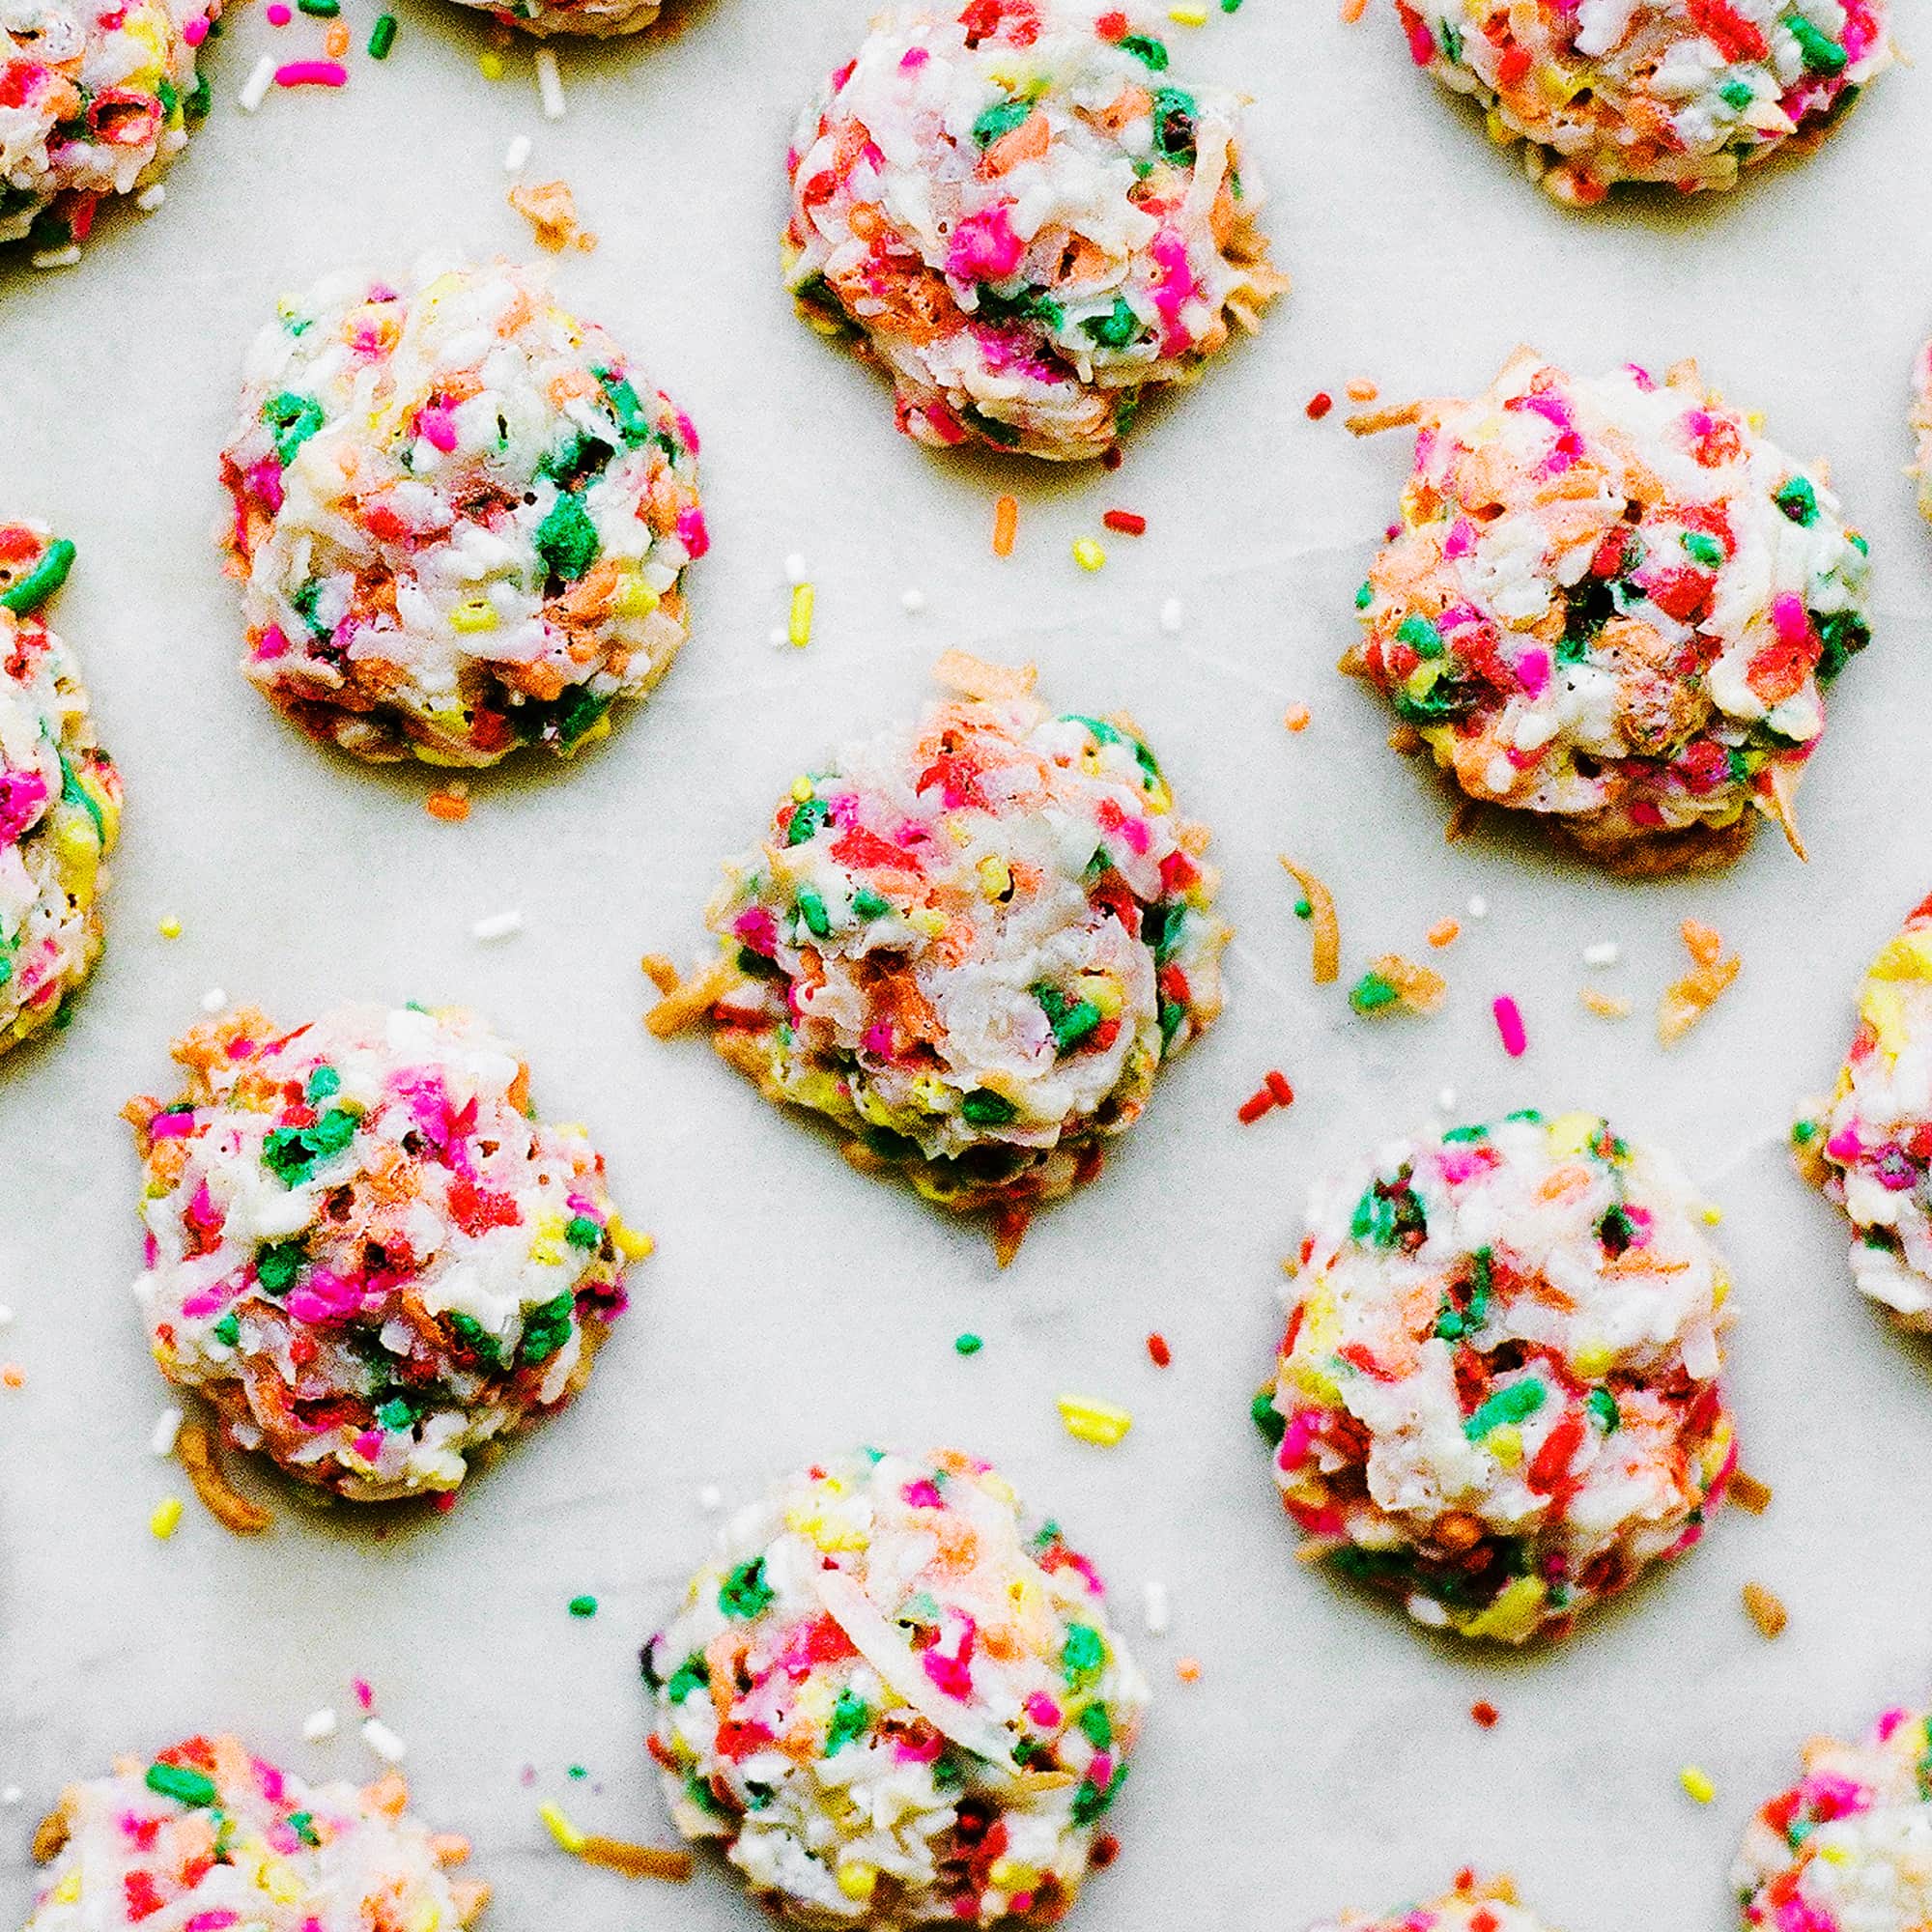 Funfetti Coconut Macaroon Recipe made with tons of rainbow sprinkles!